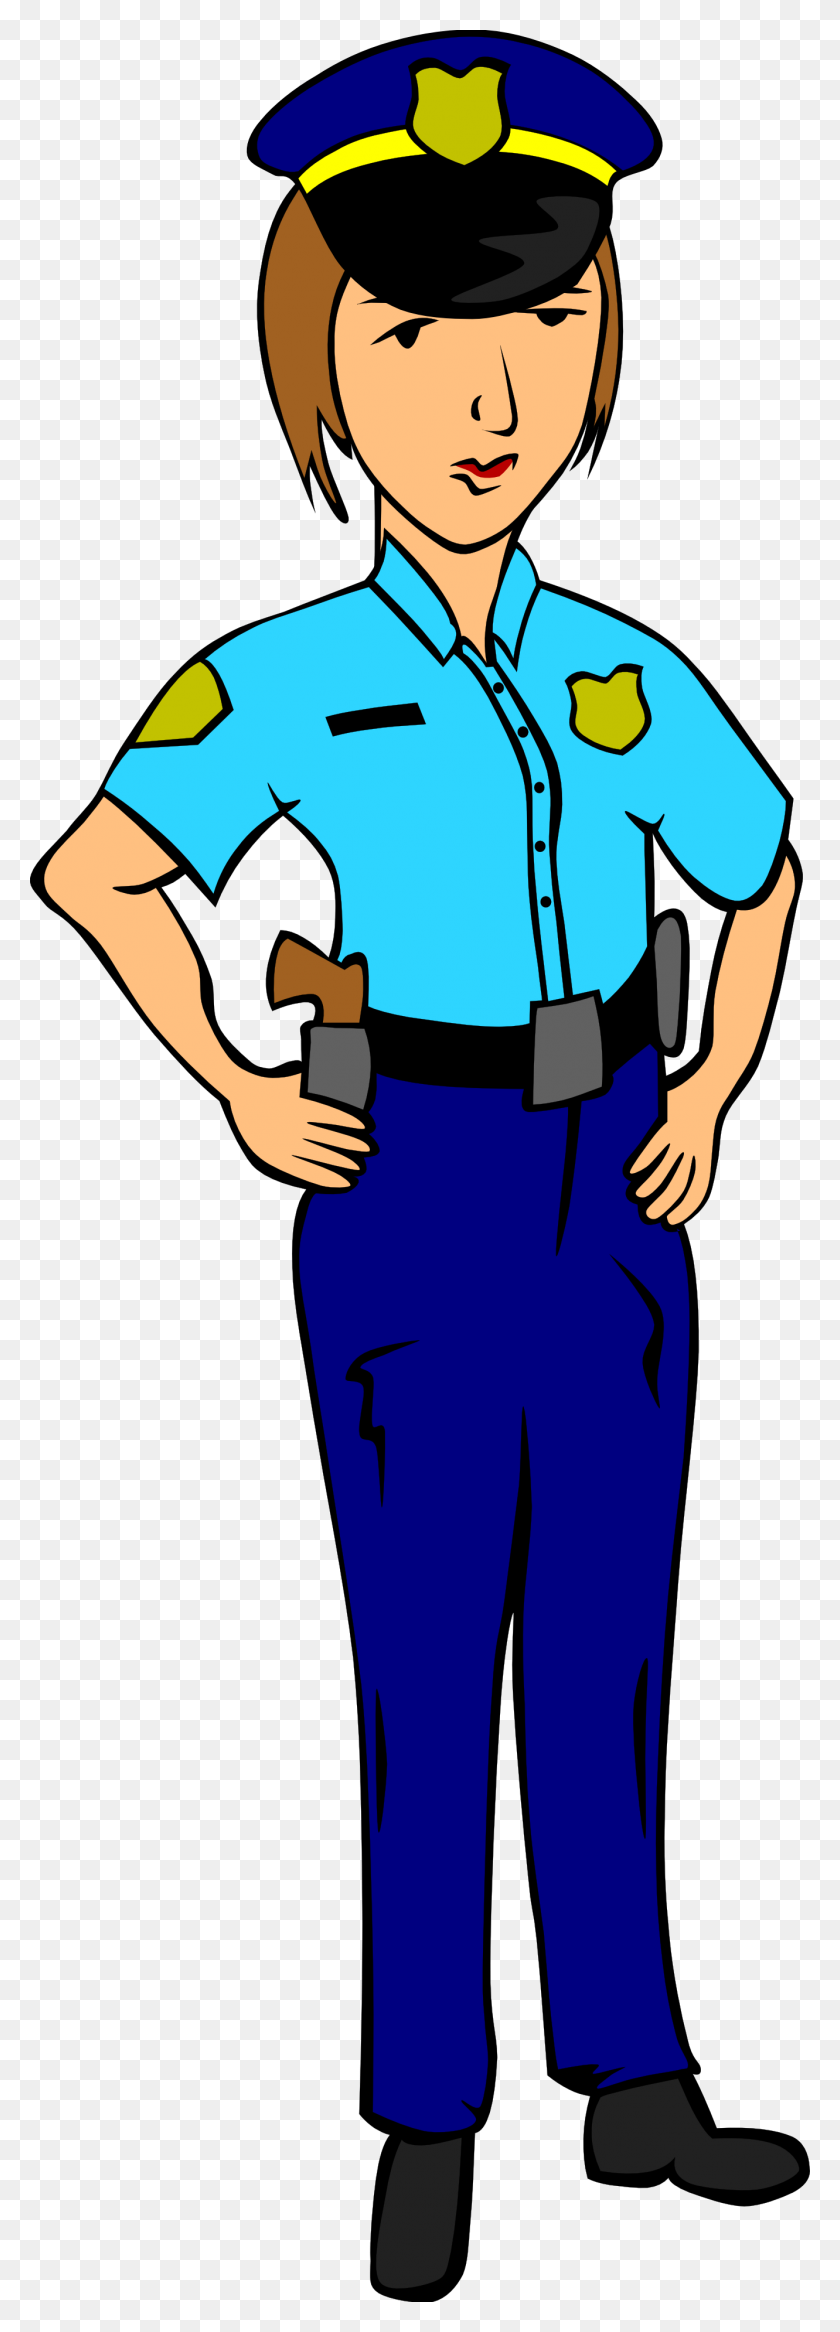 1331x3878 Clip Art Policeman Helping Lady Free Clipart Tgmvske - Helping People Clipart